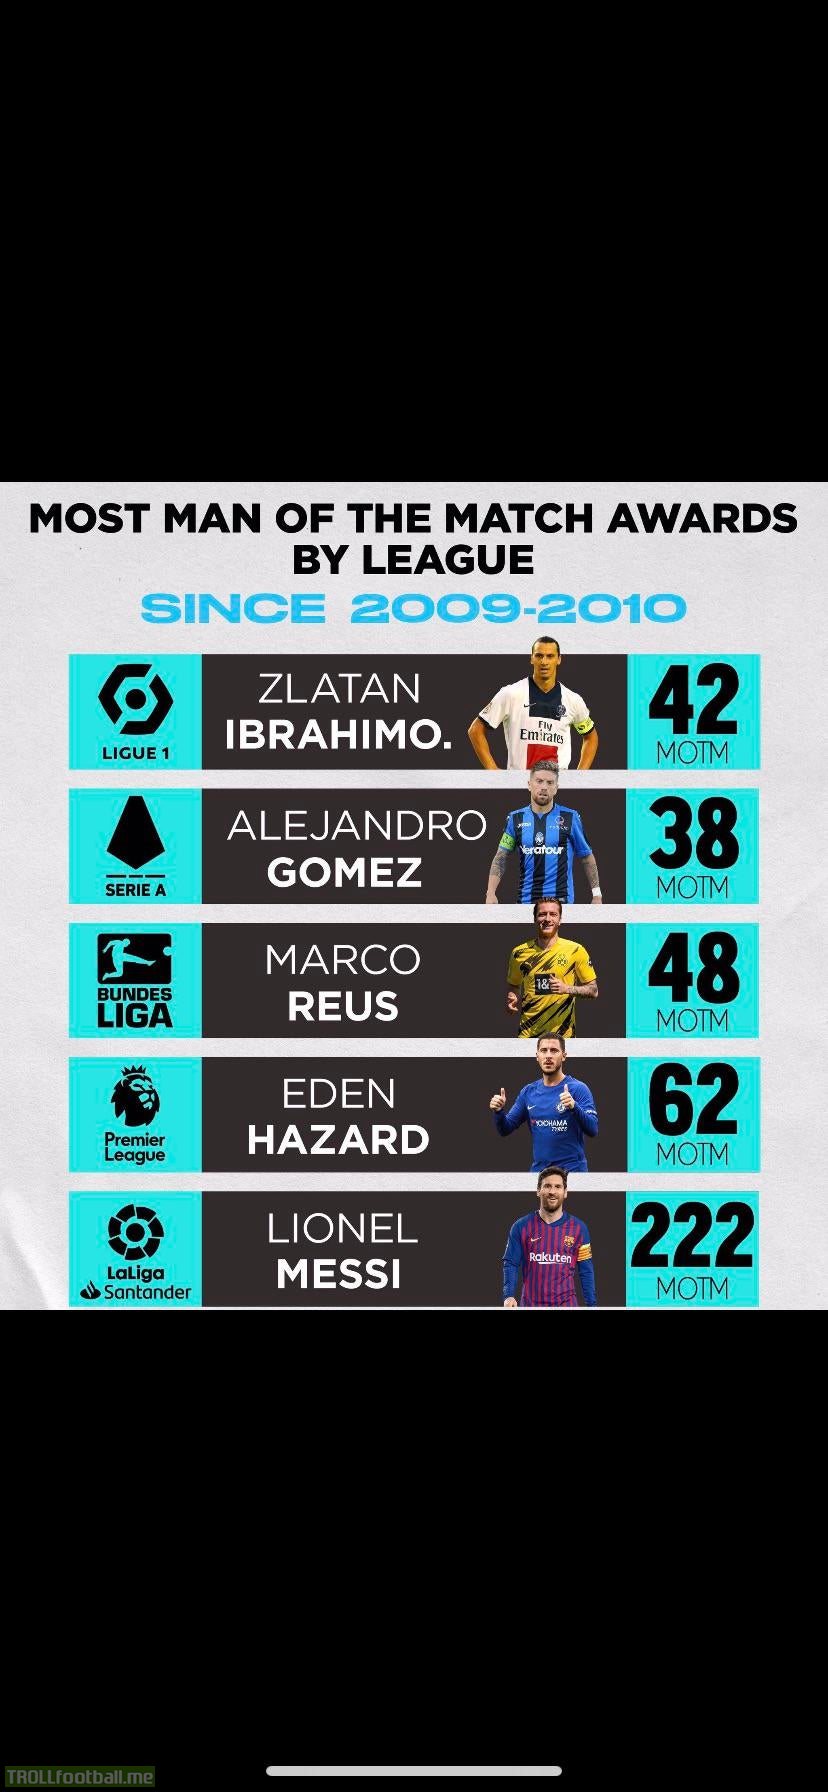 Most man of the match awards since 09-10'